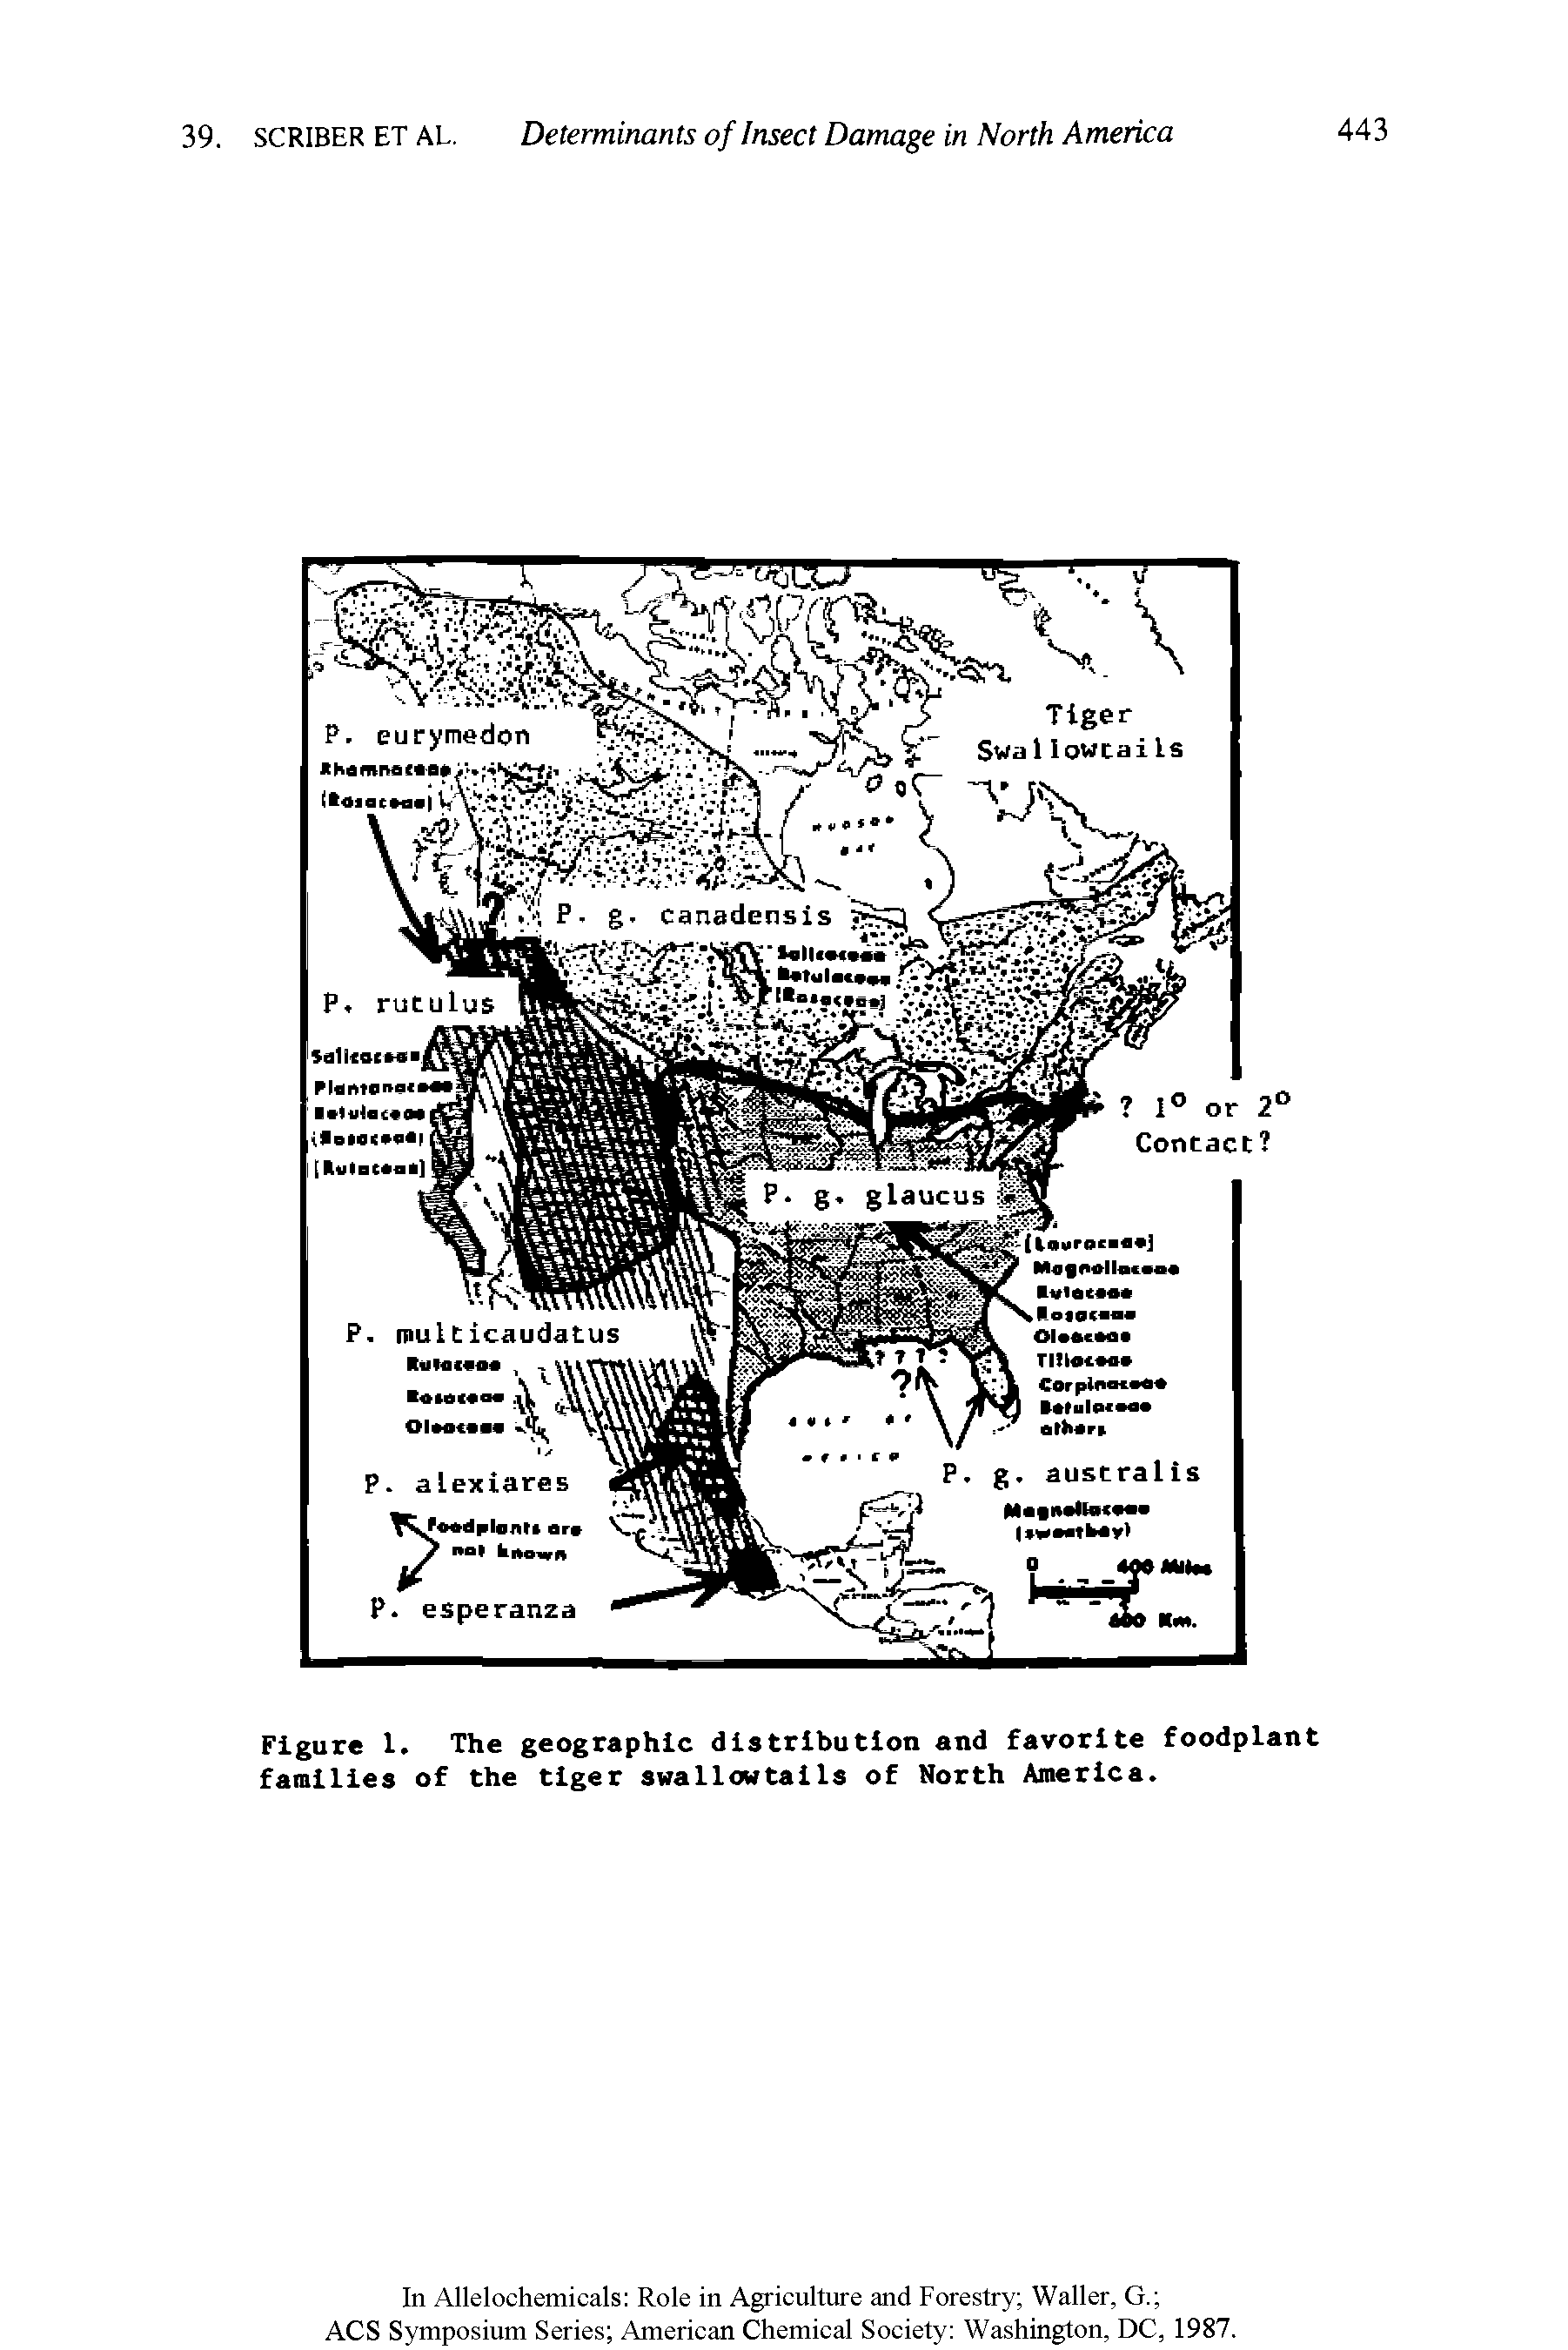 Figure 1. The geographic distribution and favorite foodplant families of the tiger swallowtails of North America.